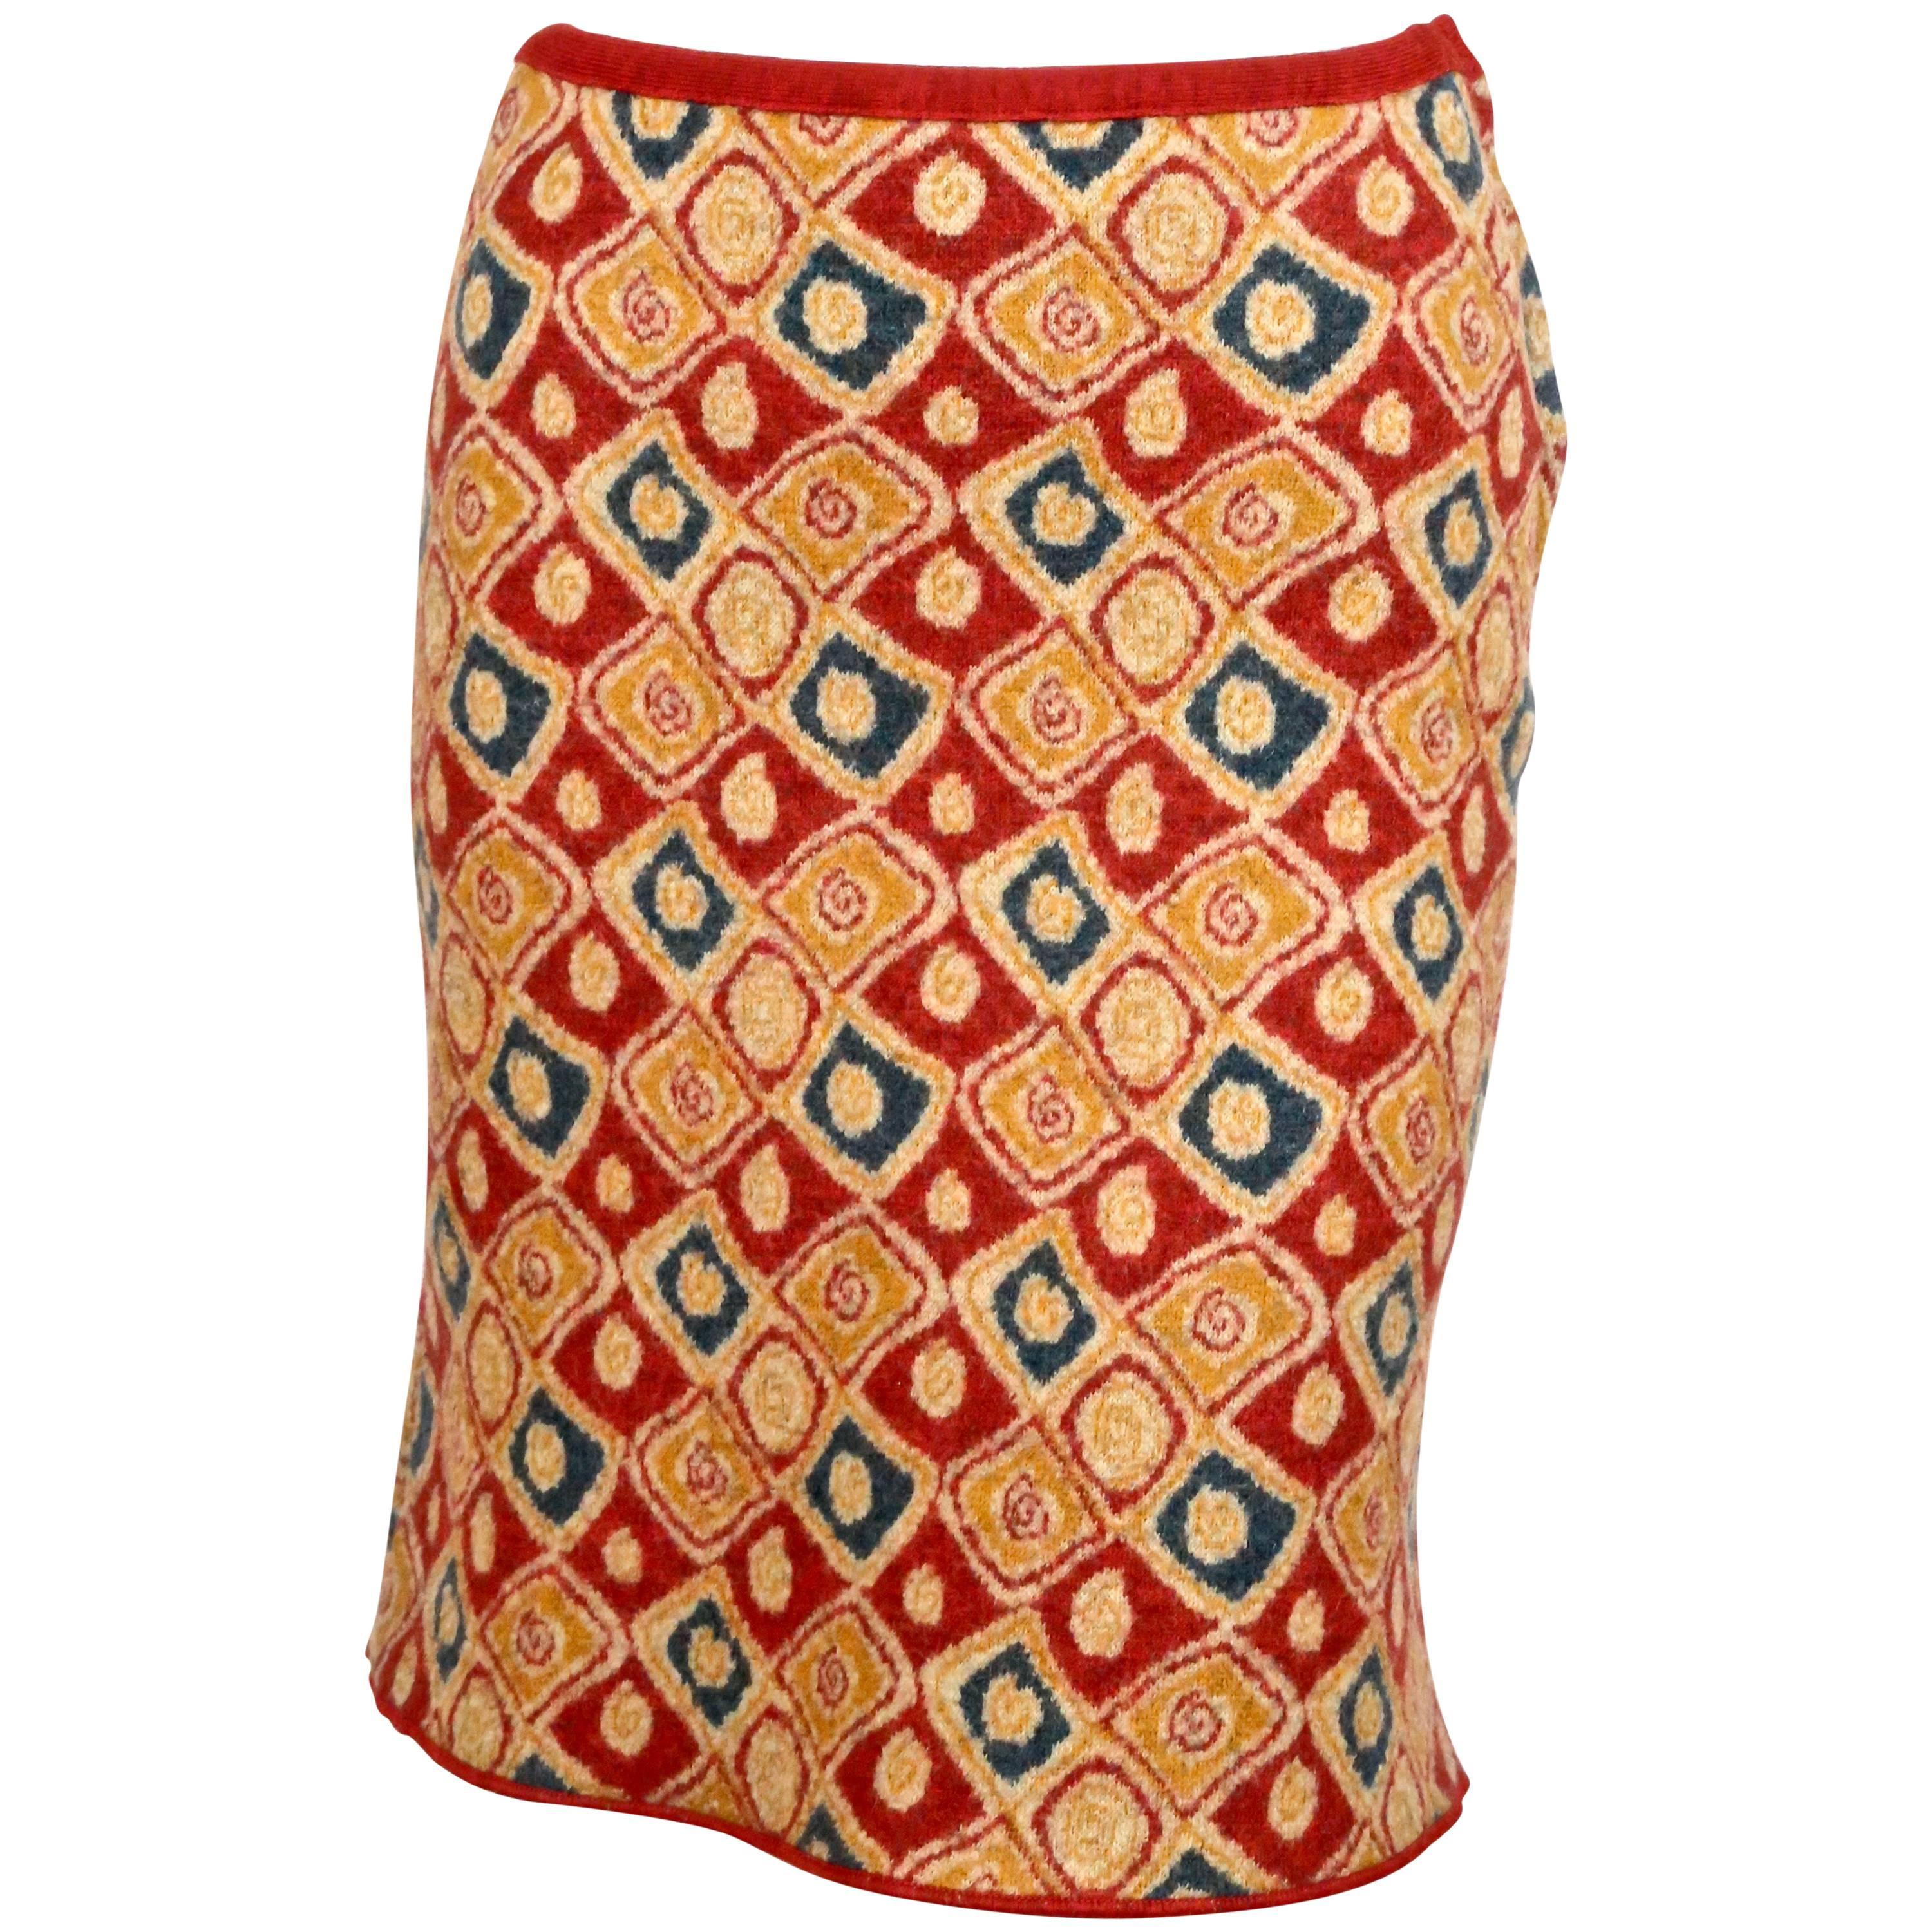 1990's AZZEDINE ALAIA red abstract patterned skirt